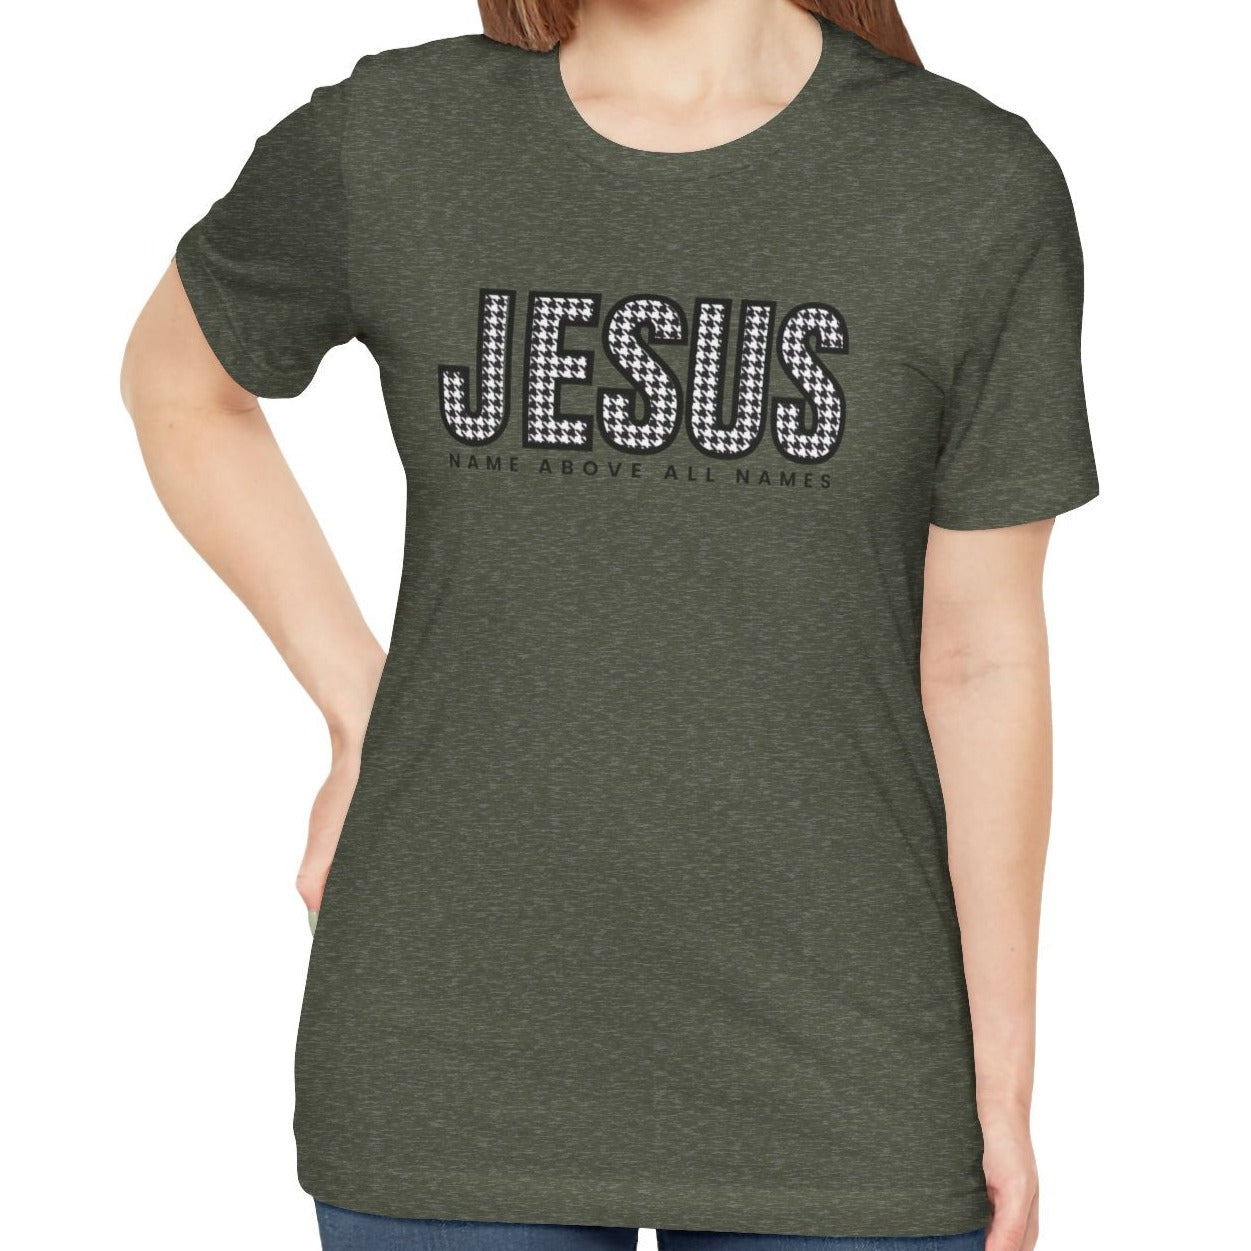 Jesus Name Above All Names Women's Bella Canvas Tee - Inspirational Comfort - Eddy and Rita